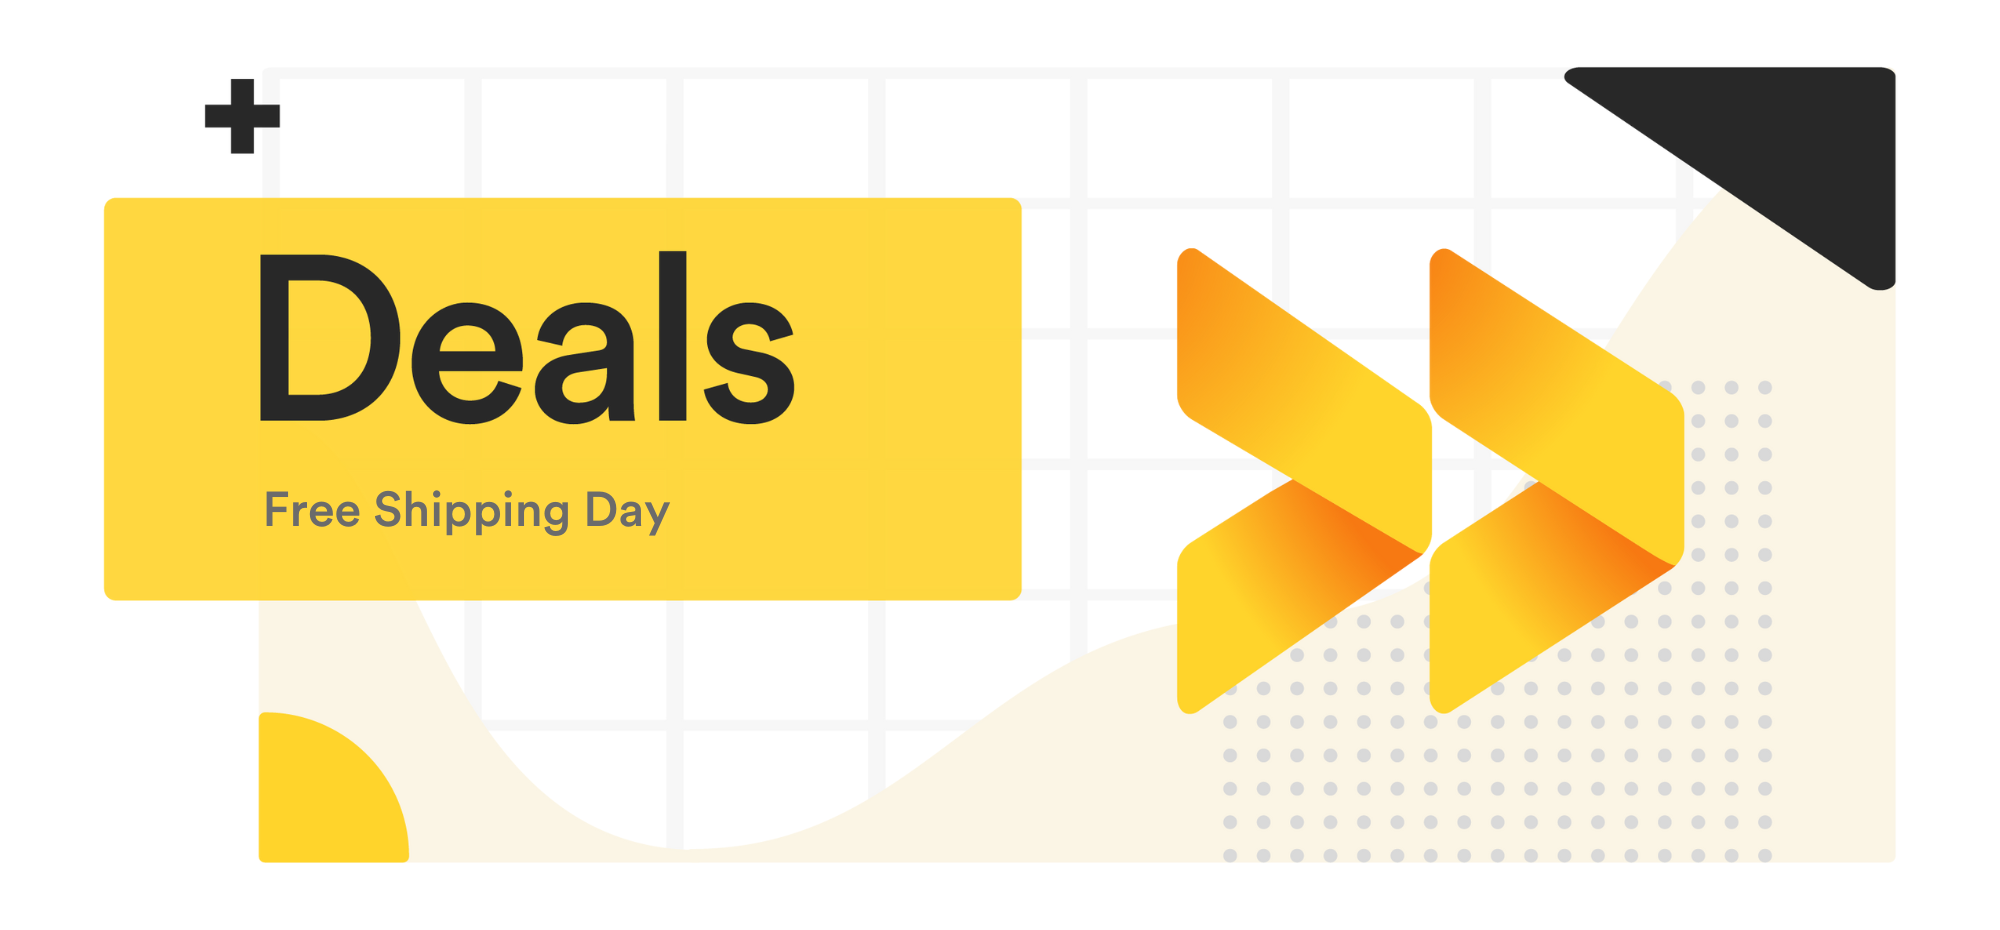 📦 Free Shipping Day Deals